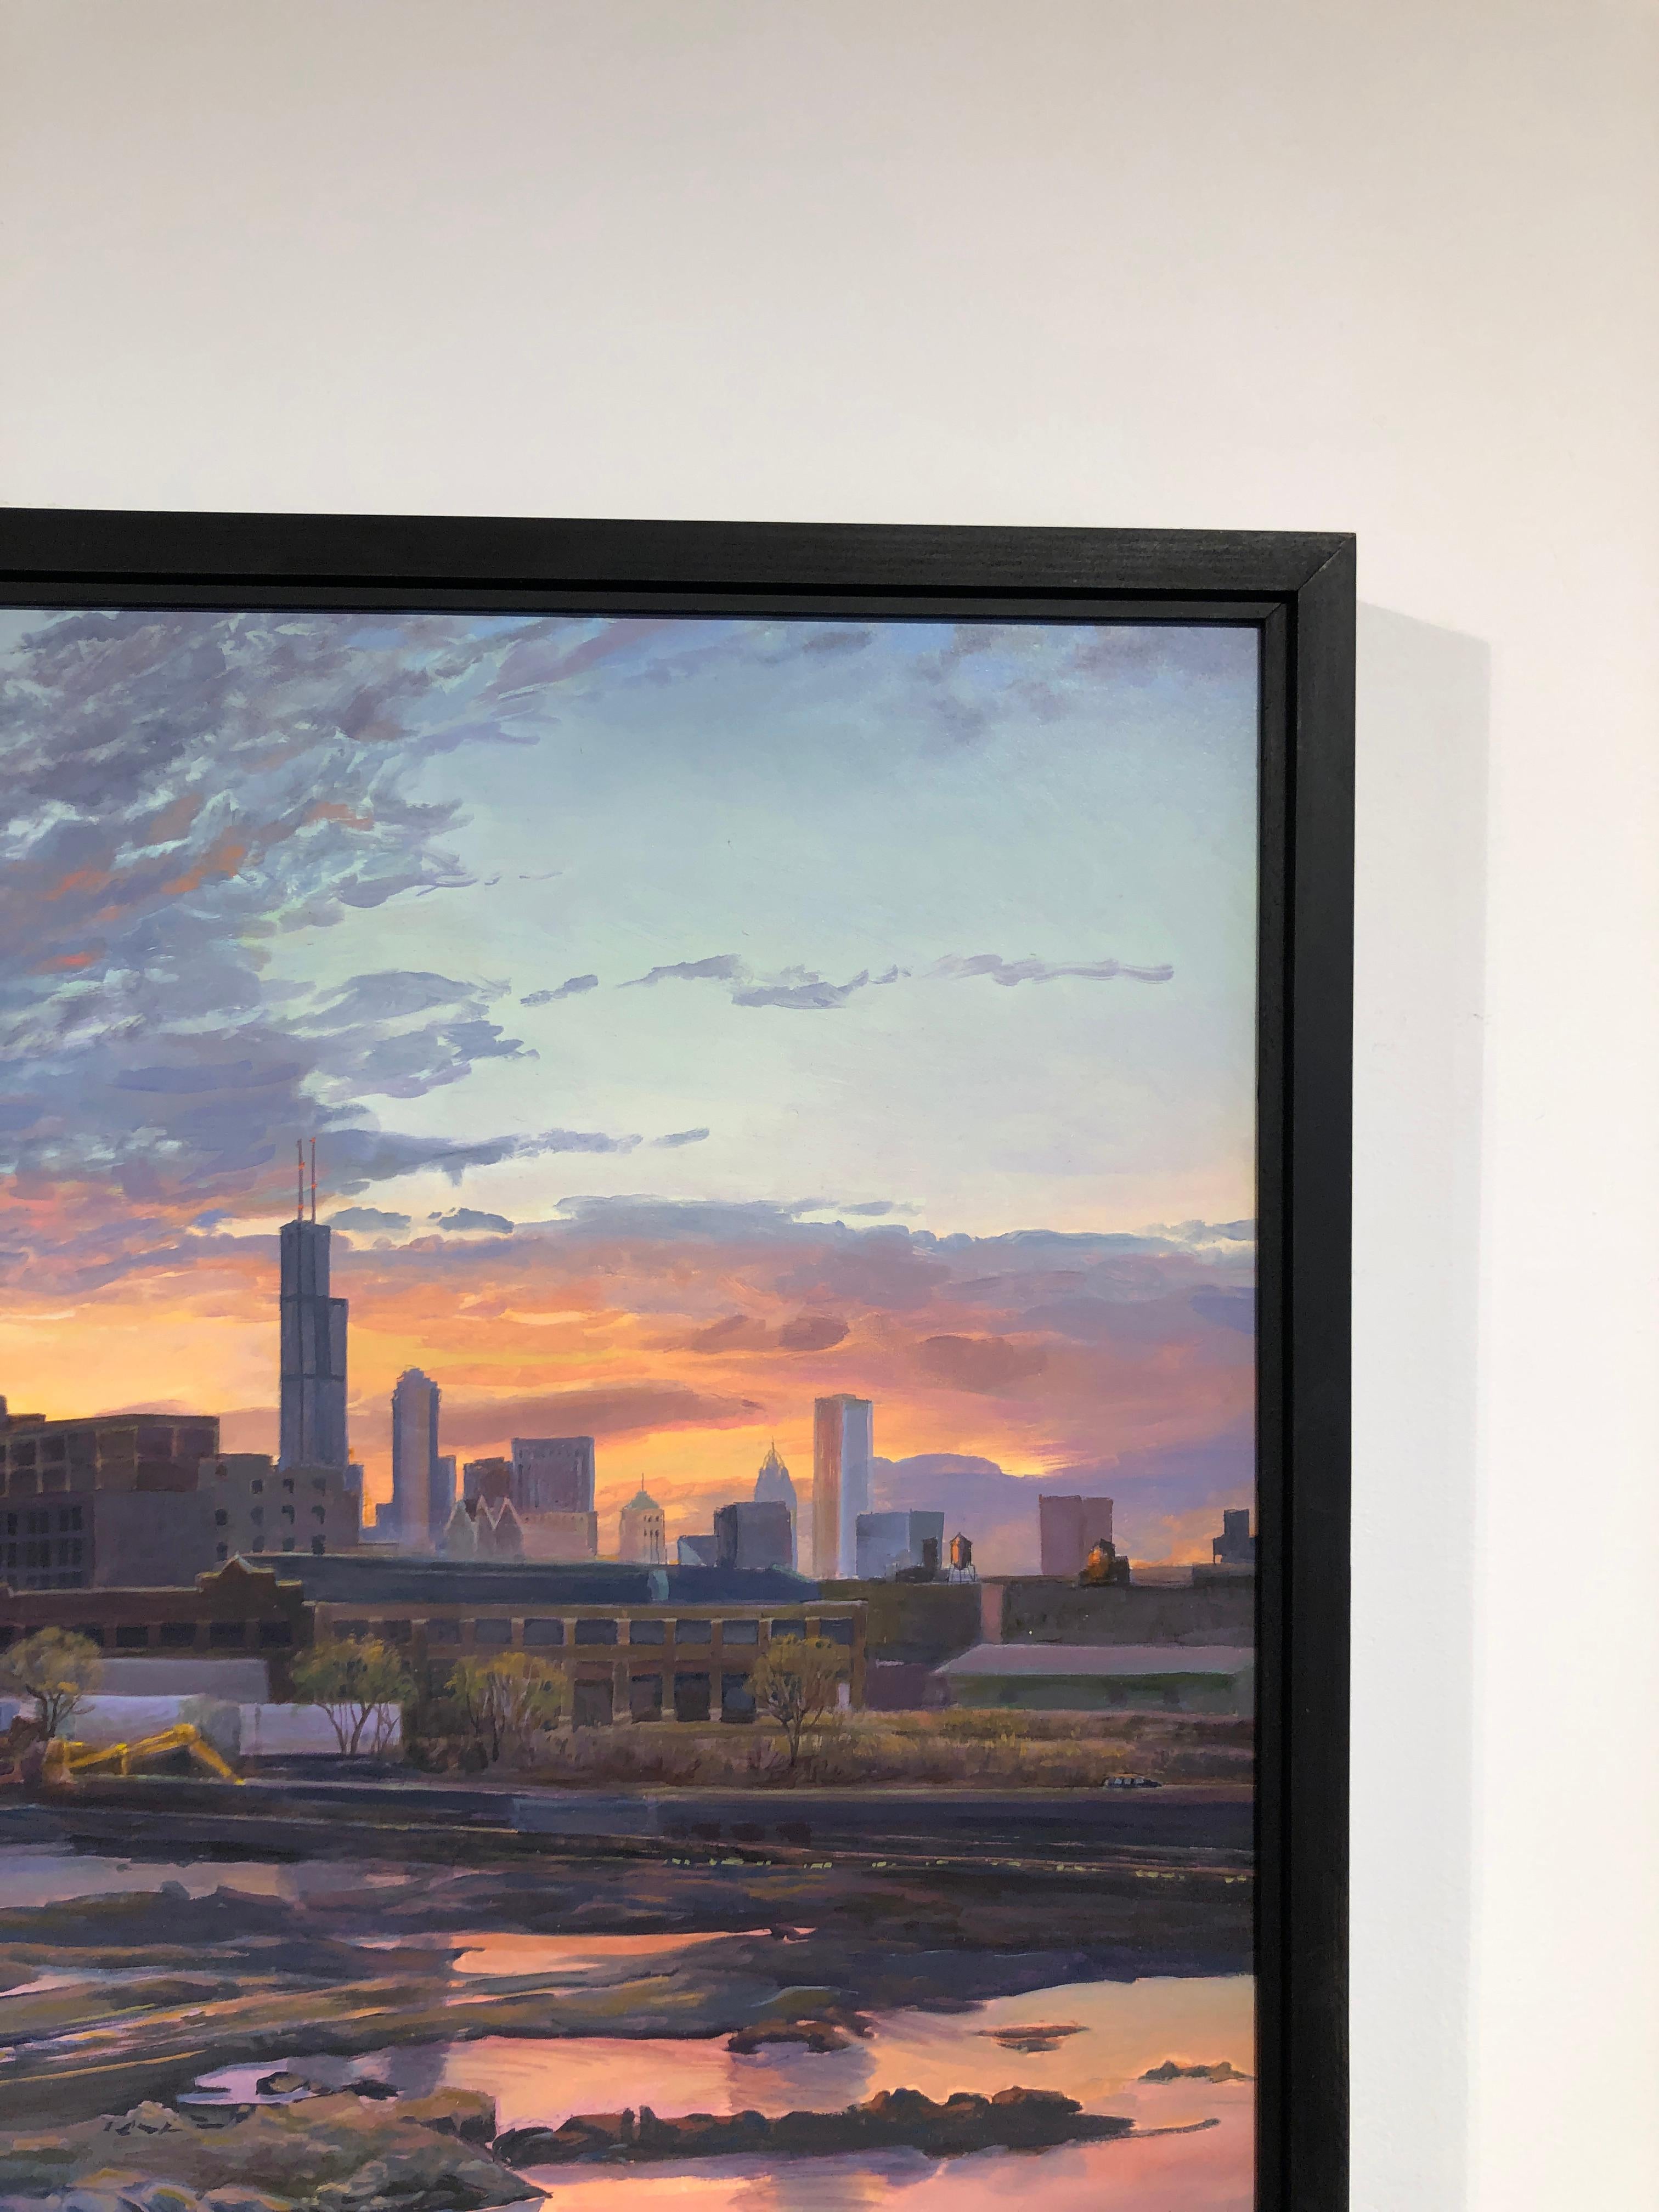 AWARDS
Second Place Award for “View of Zug,” at “Urban Edge,” Grosse Pointe Art Center, Grosse Pointe, MI
Henry Billings Award for “Skyway,” at “71st National Midyear show,” Butler Institute of American Art, Youngstown, OH
Juror’s Award for “Rouge